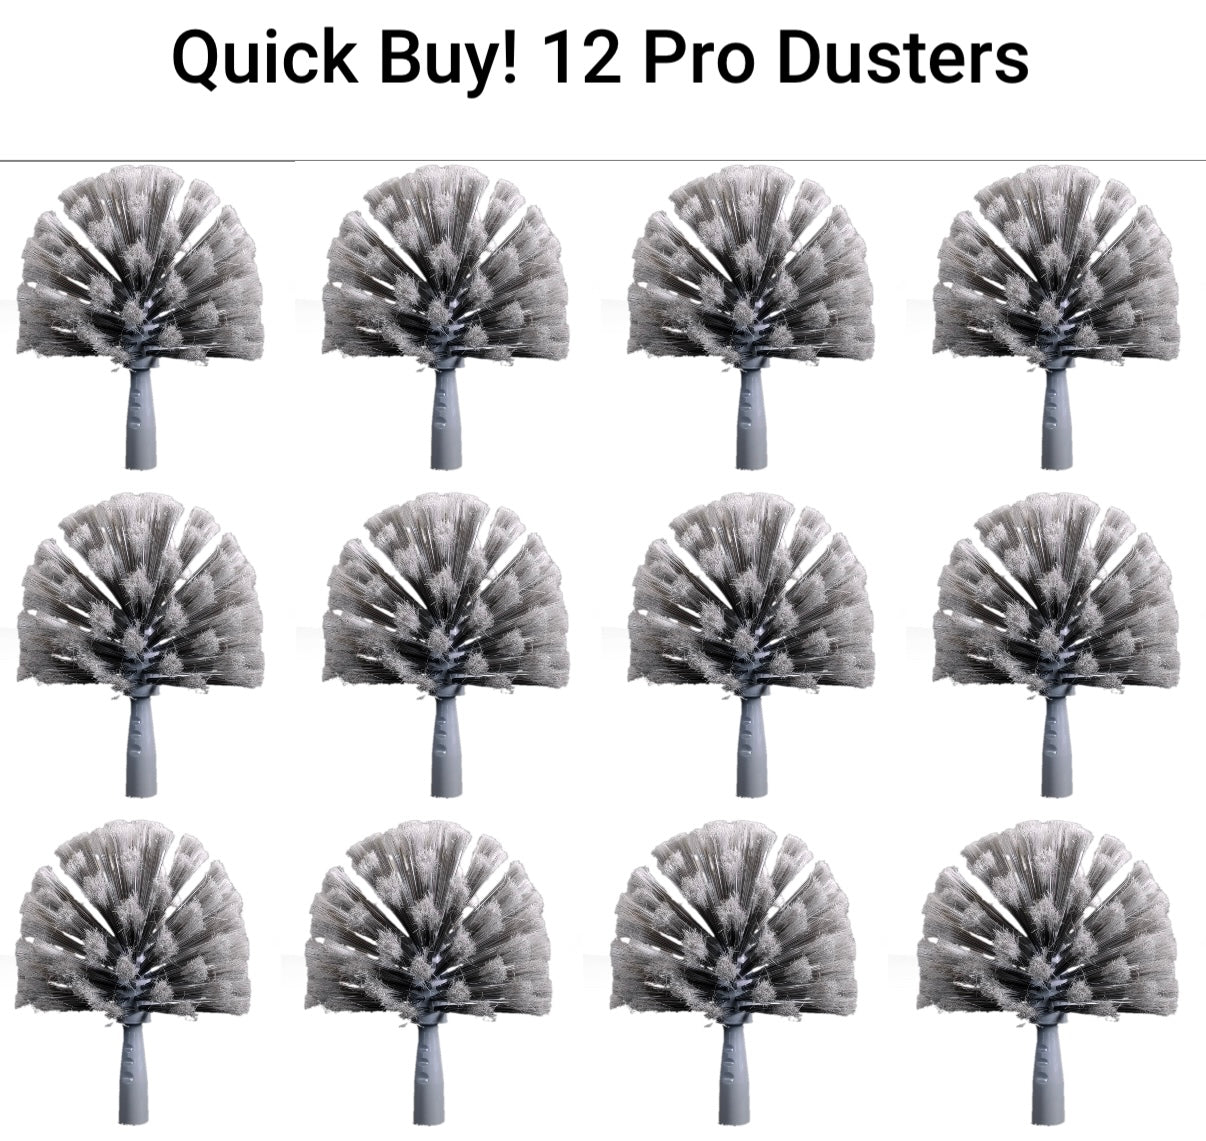 SOLD OUT (will be back in stock 3rd week of June) Case of 12 Pro Dusters